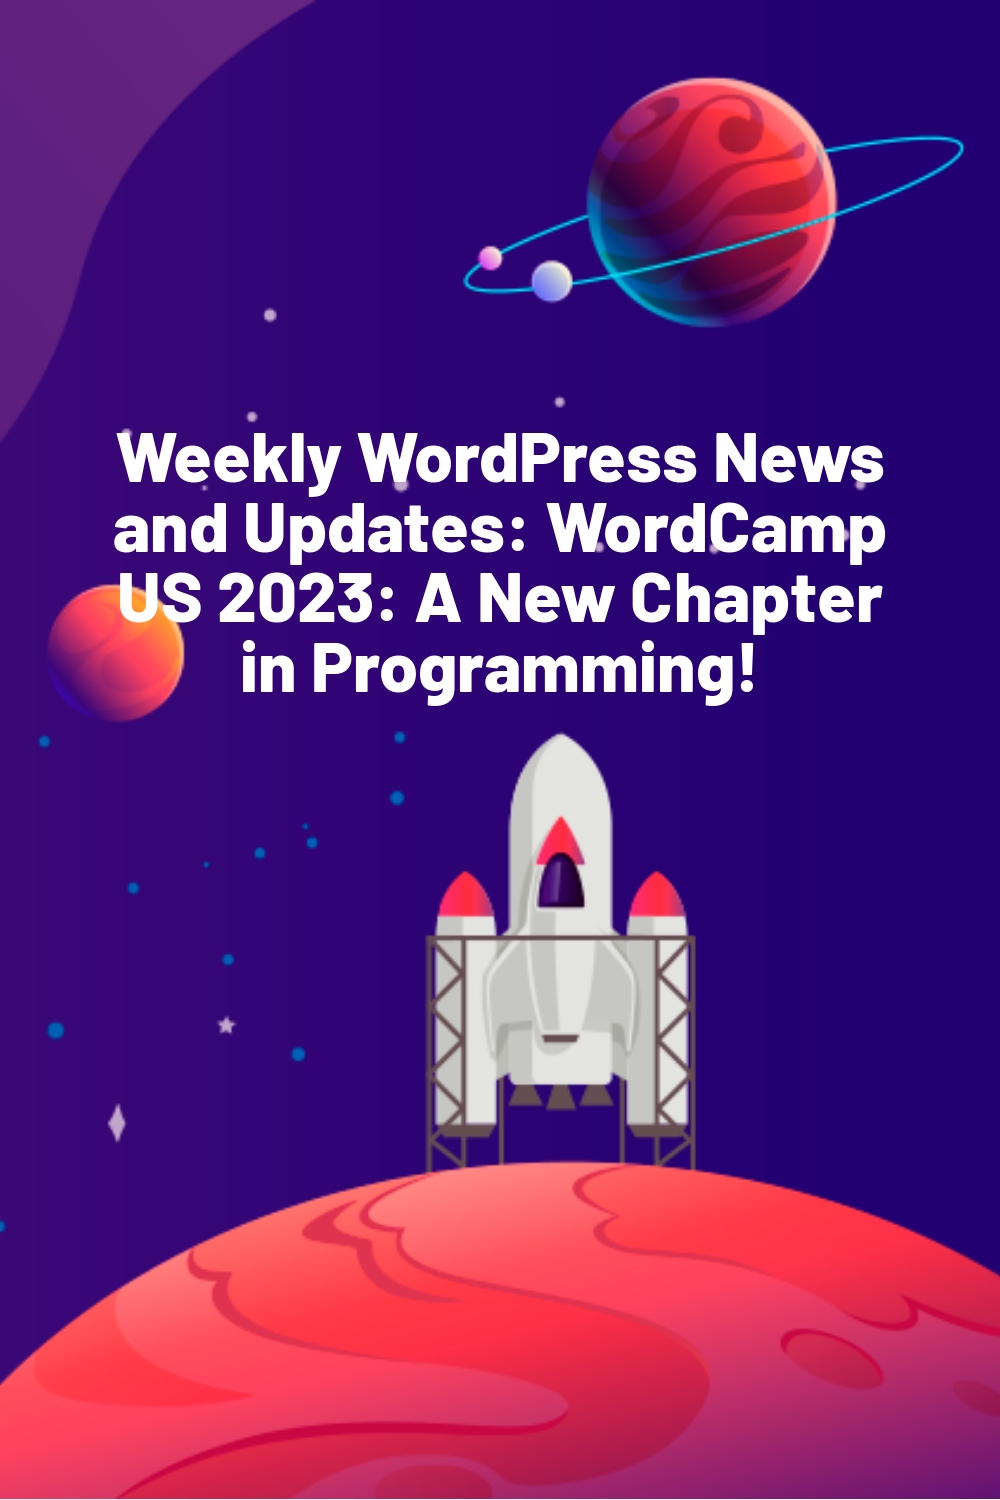 Weekly WordPress News and Updates: WordCamp US 2023: A New Chapter in Programming!